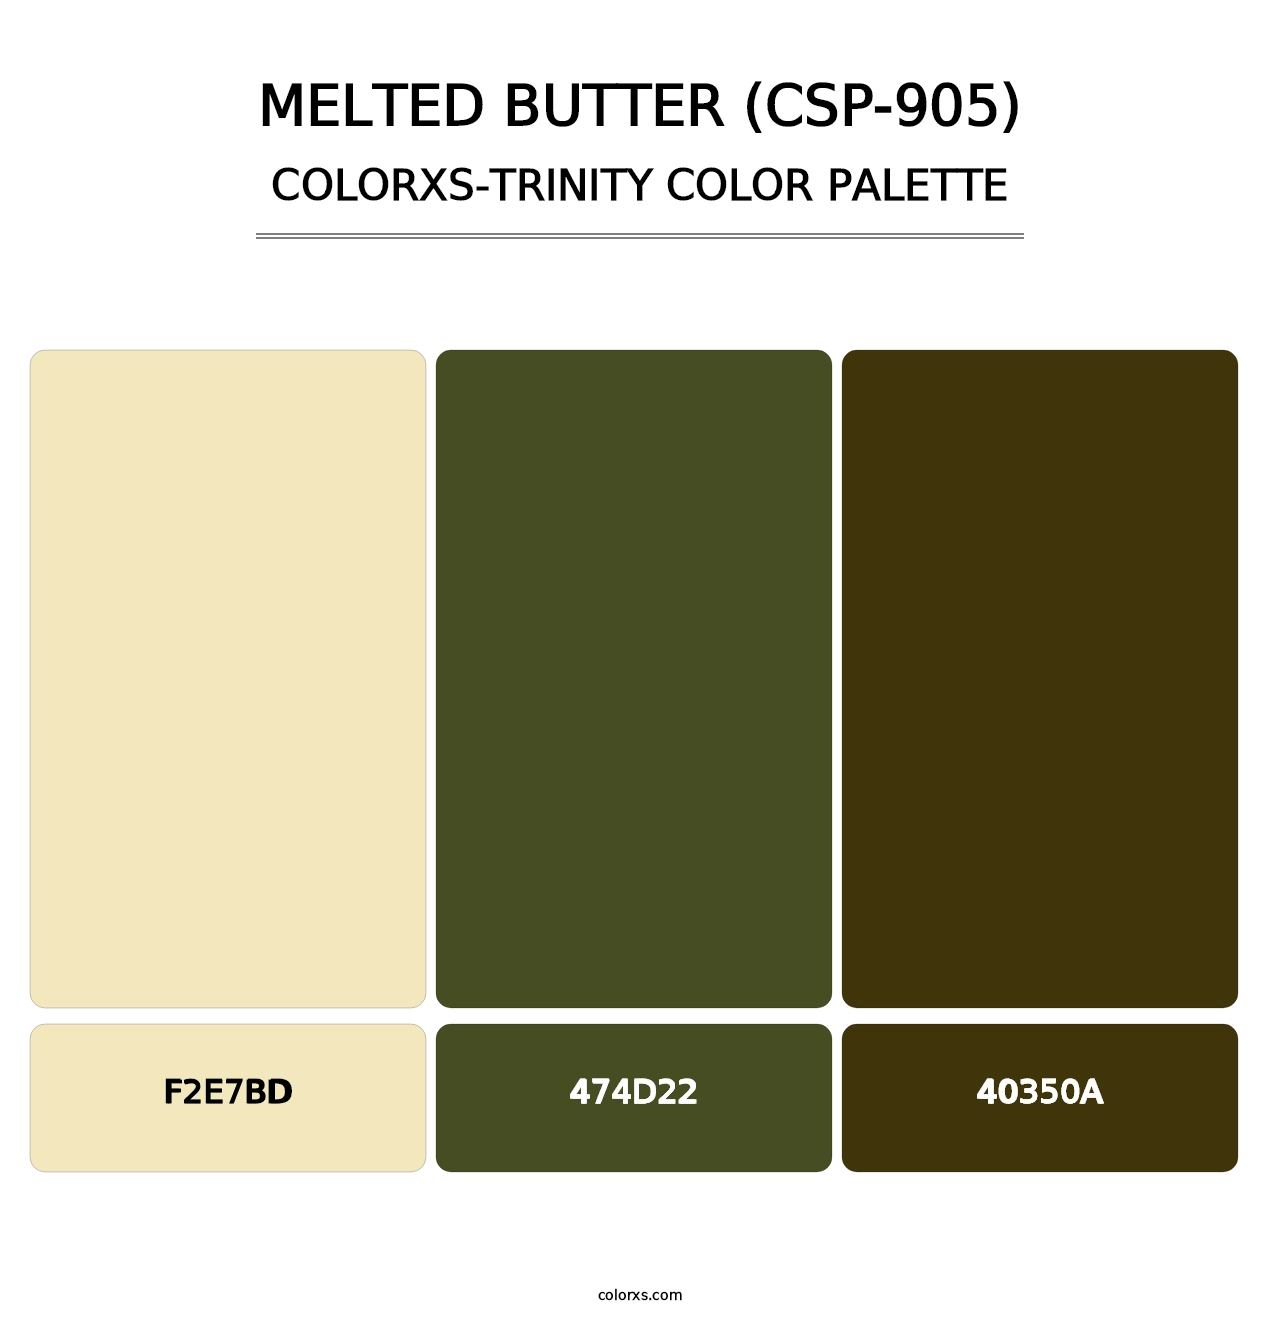 Melted Butter (CSP-905) - Colorxs Trinity Palette